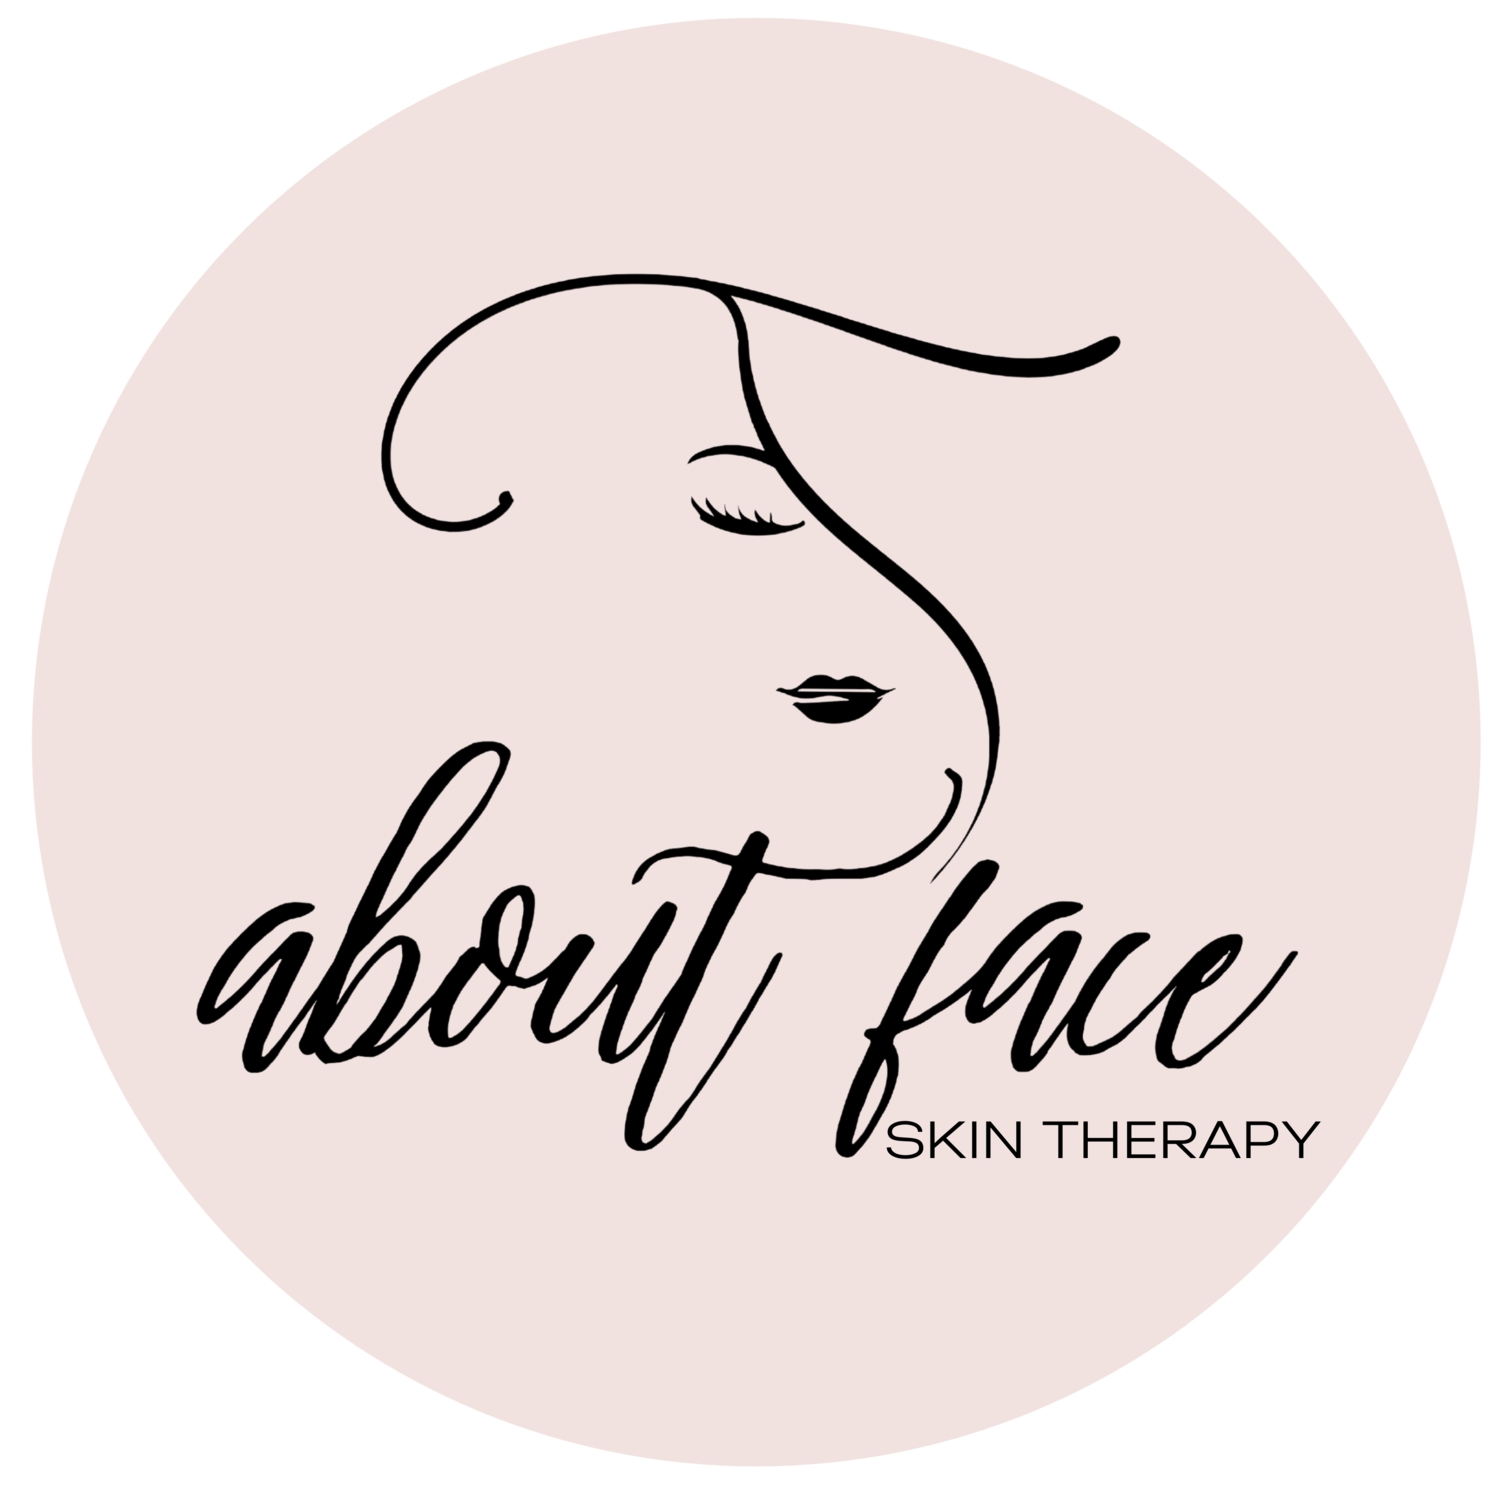 About Face Skin Therapy 